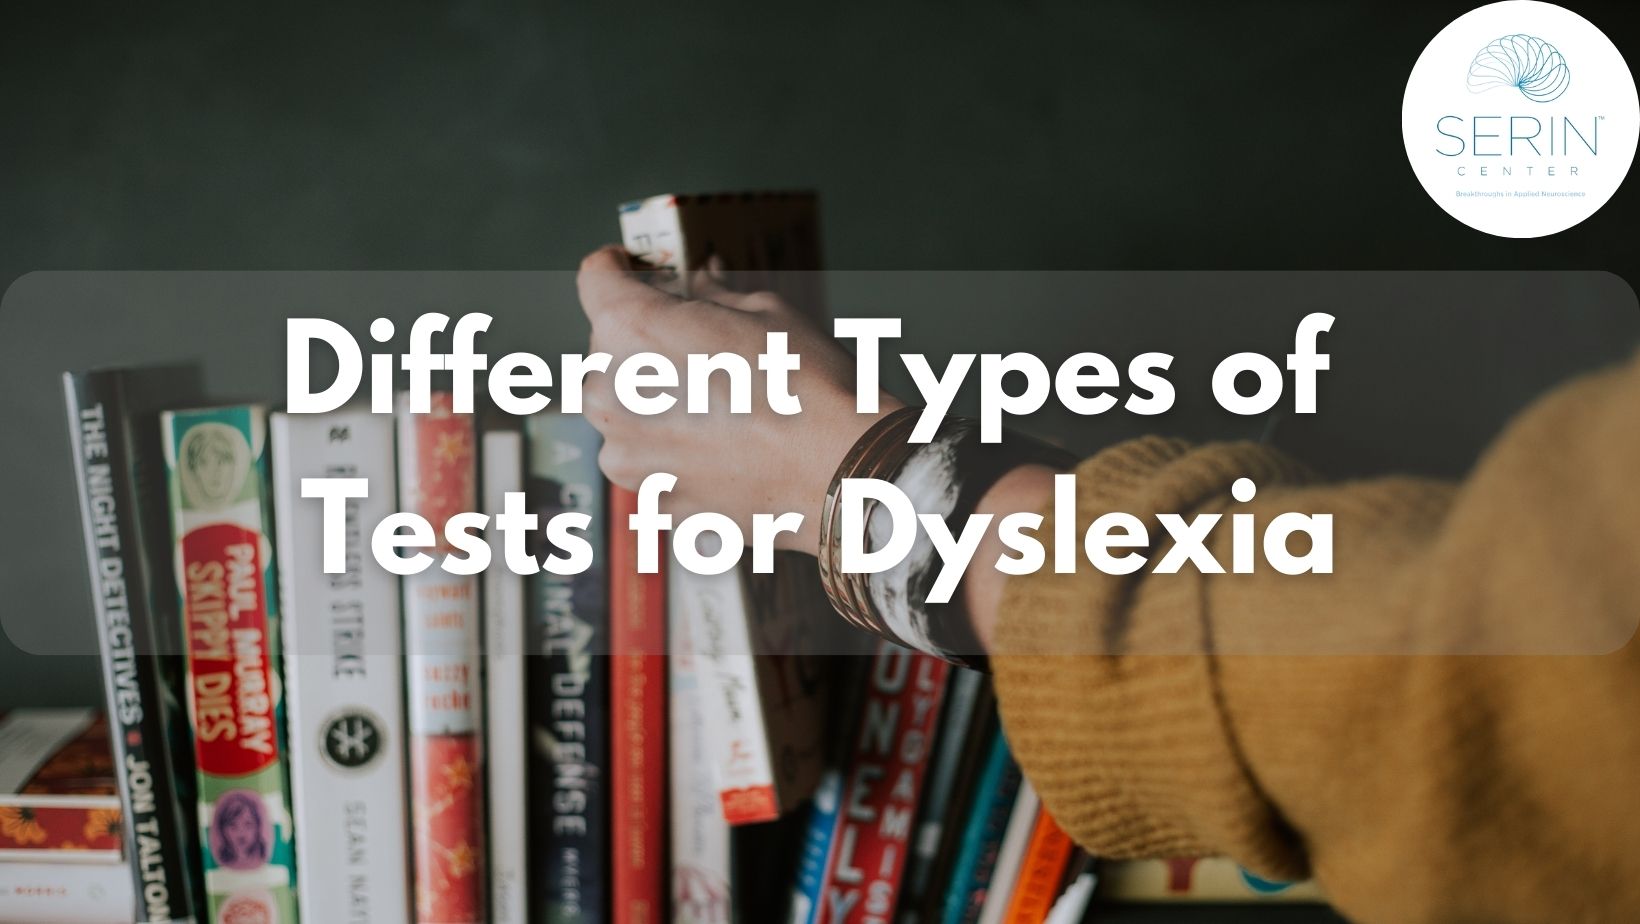 Different types of dyslexia tests.